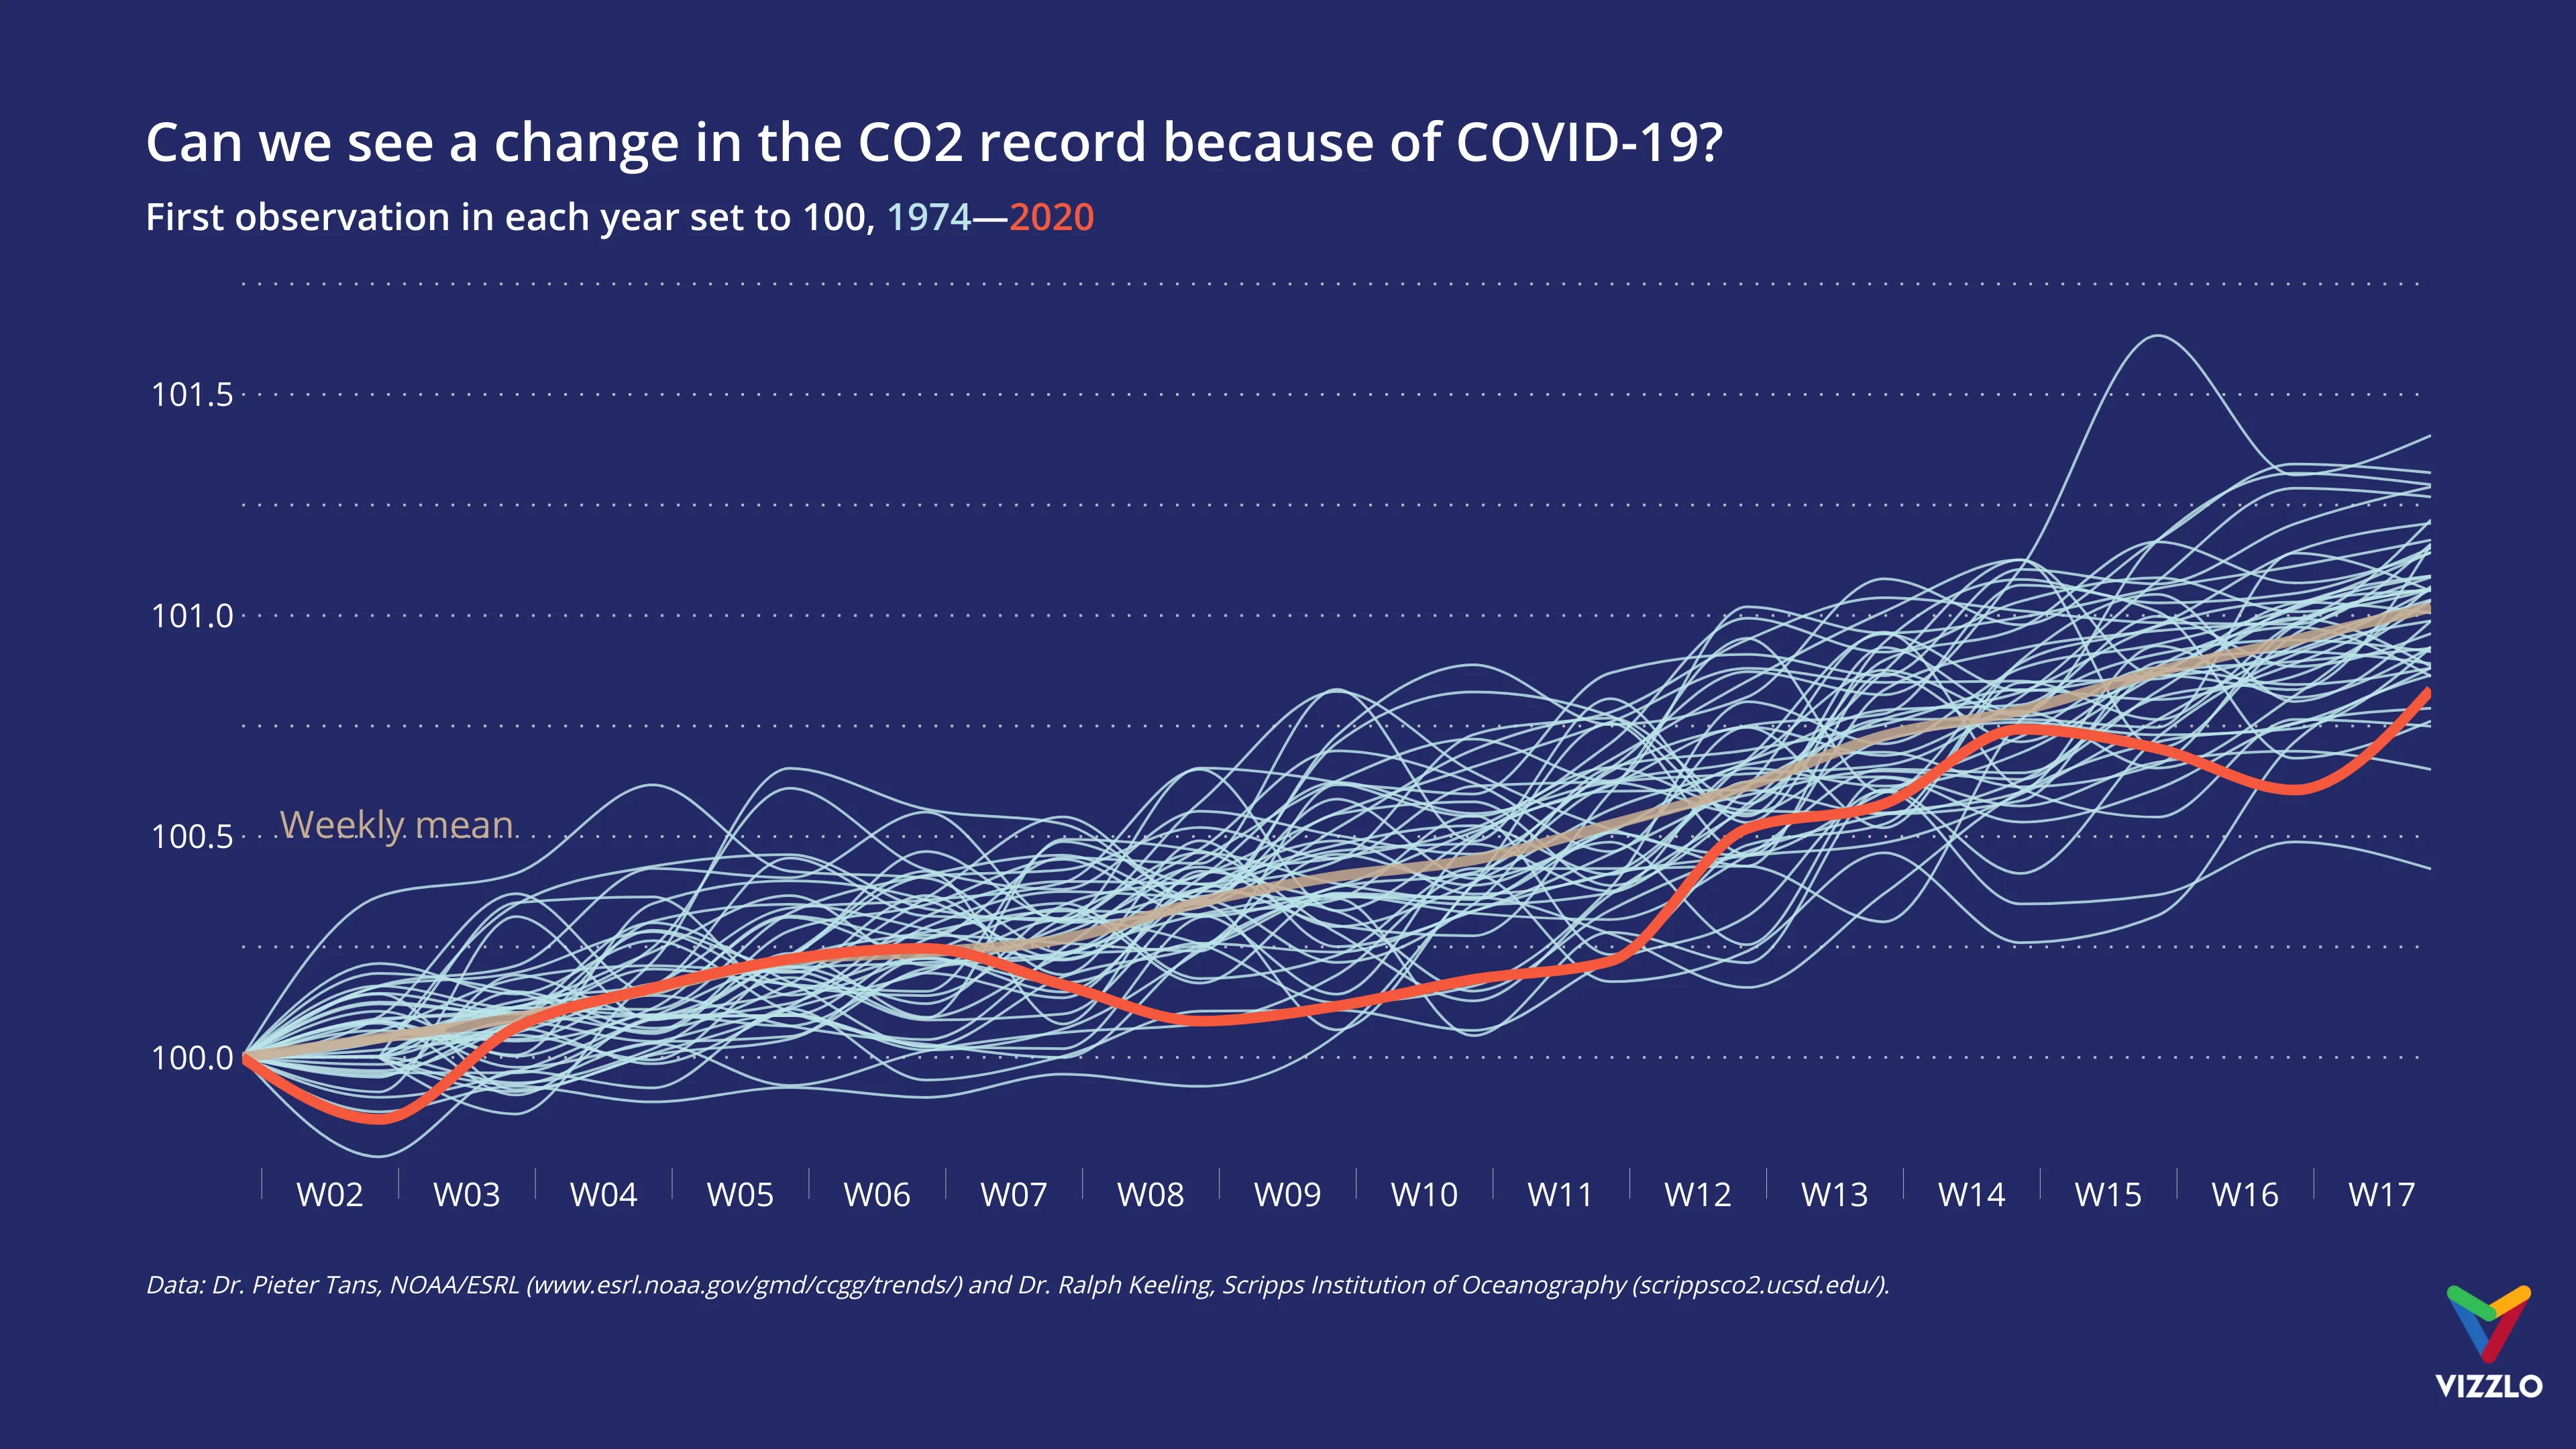 Can we see a change in the CO2 record because of COVID-19?